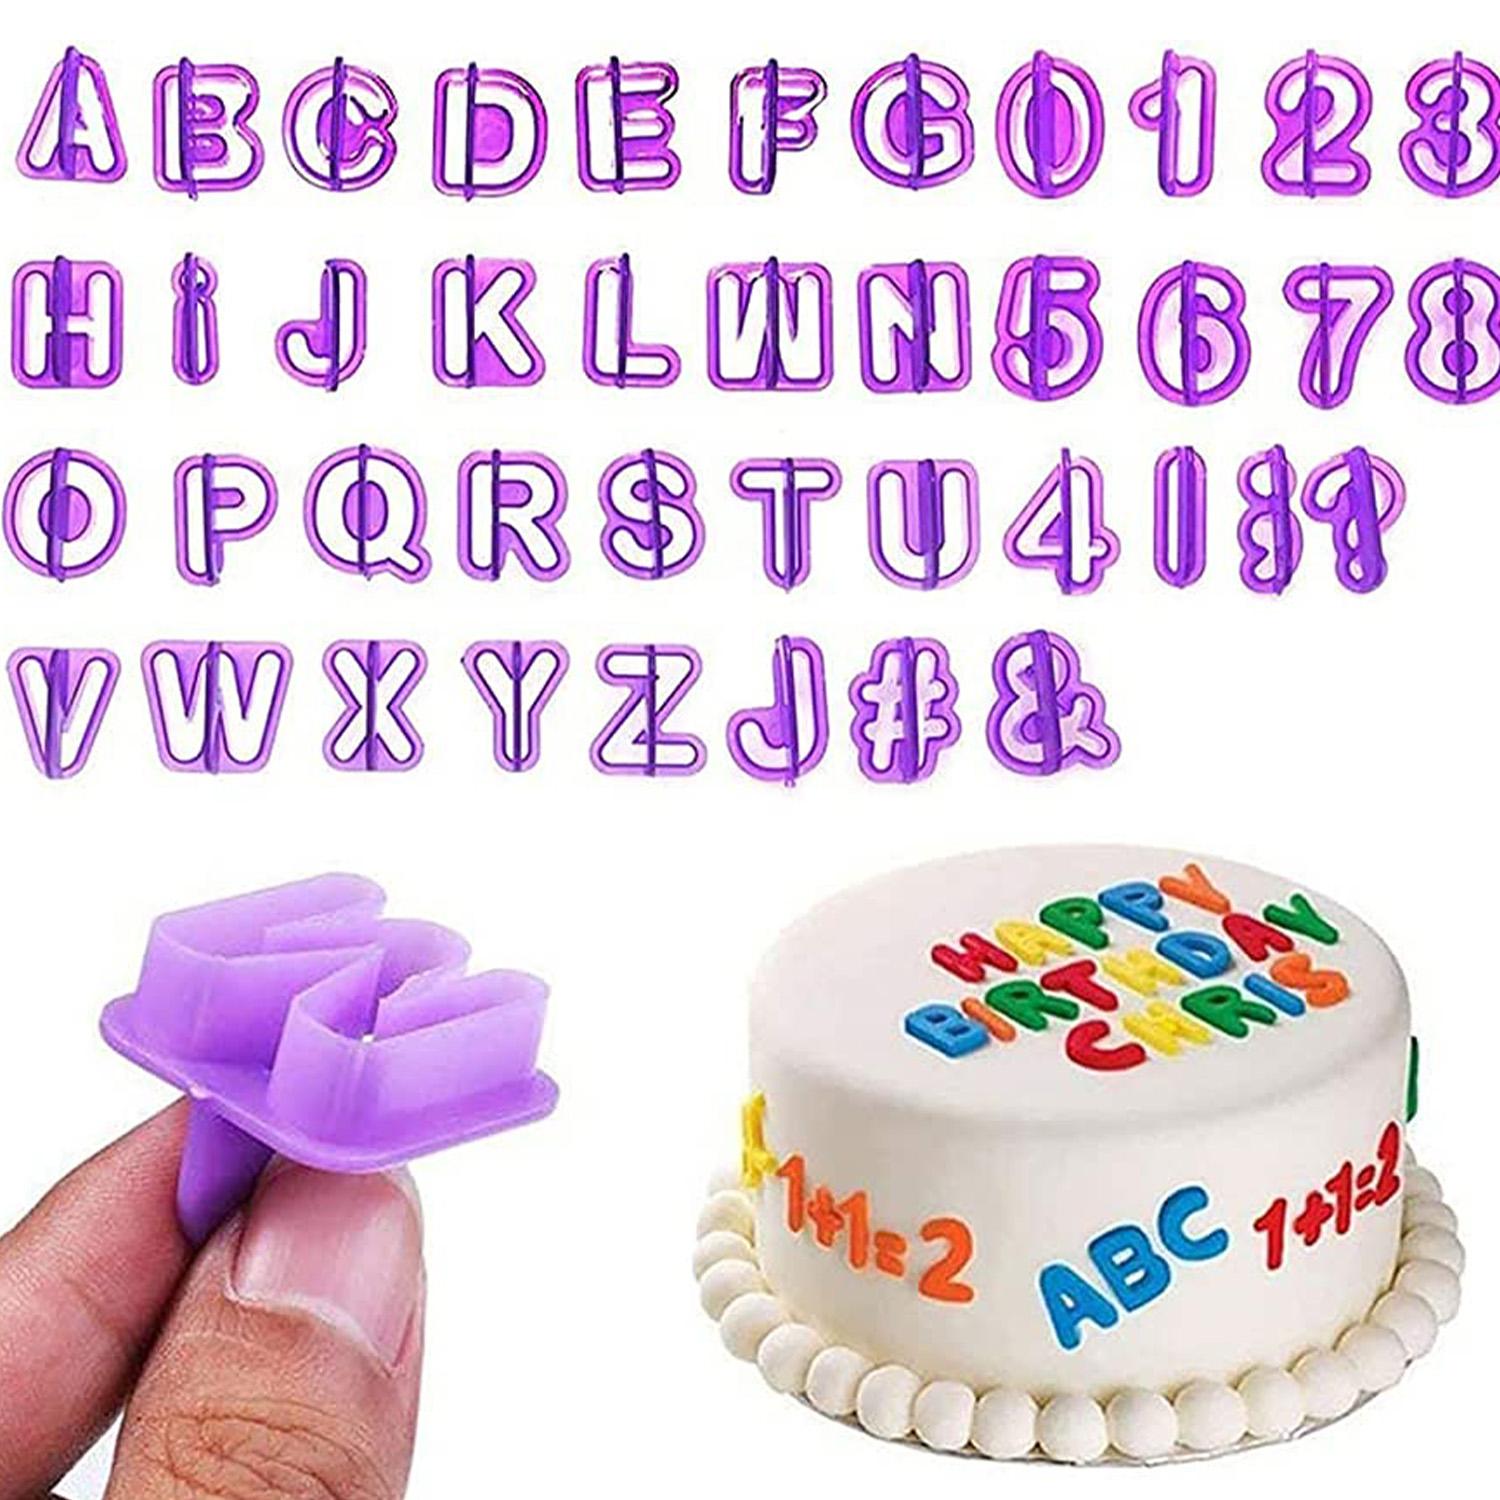 FONDANT TOOLS AND CUTTERS KIT